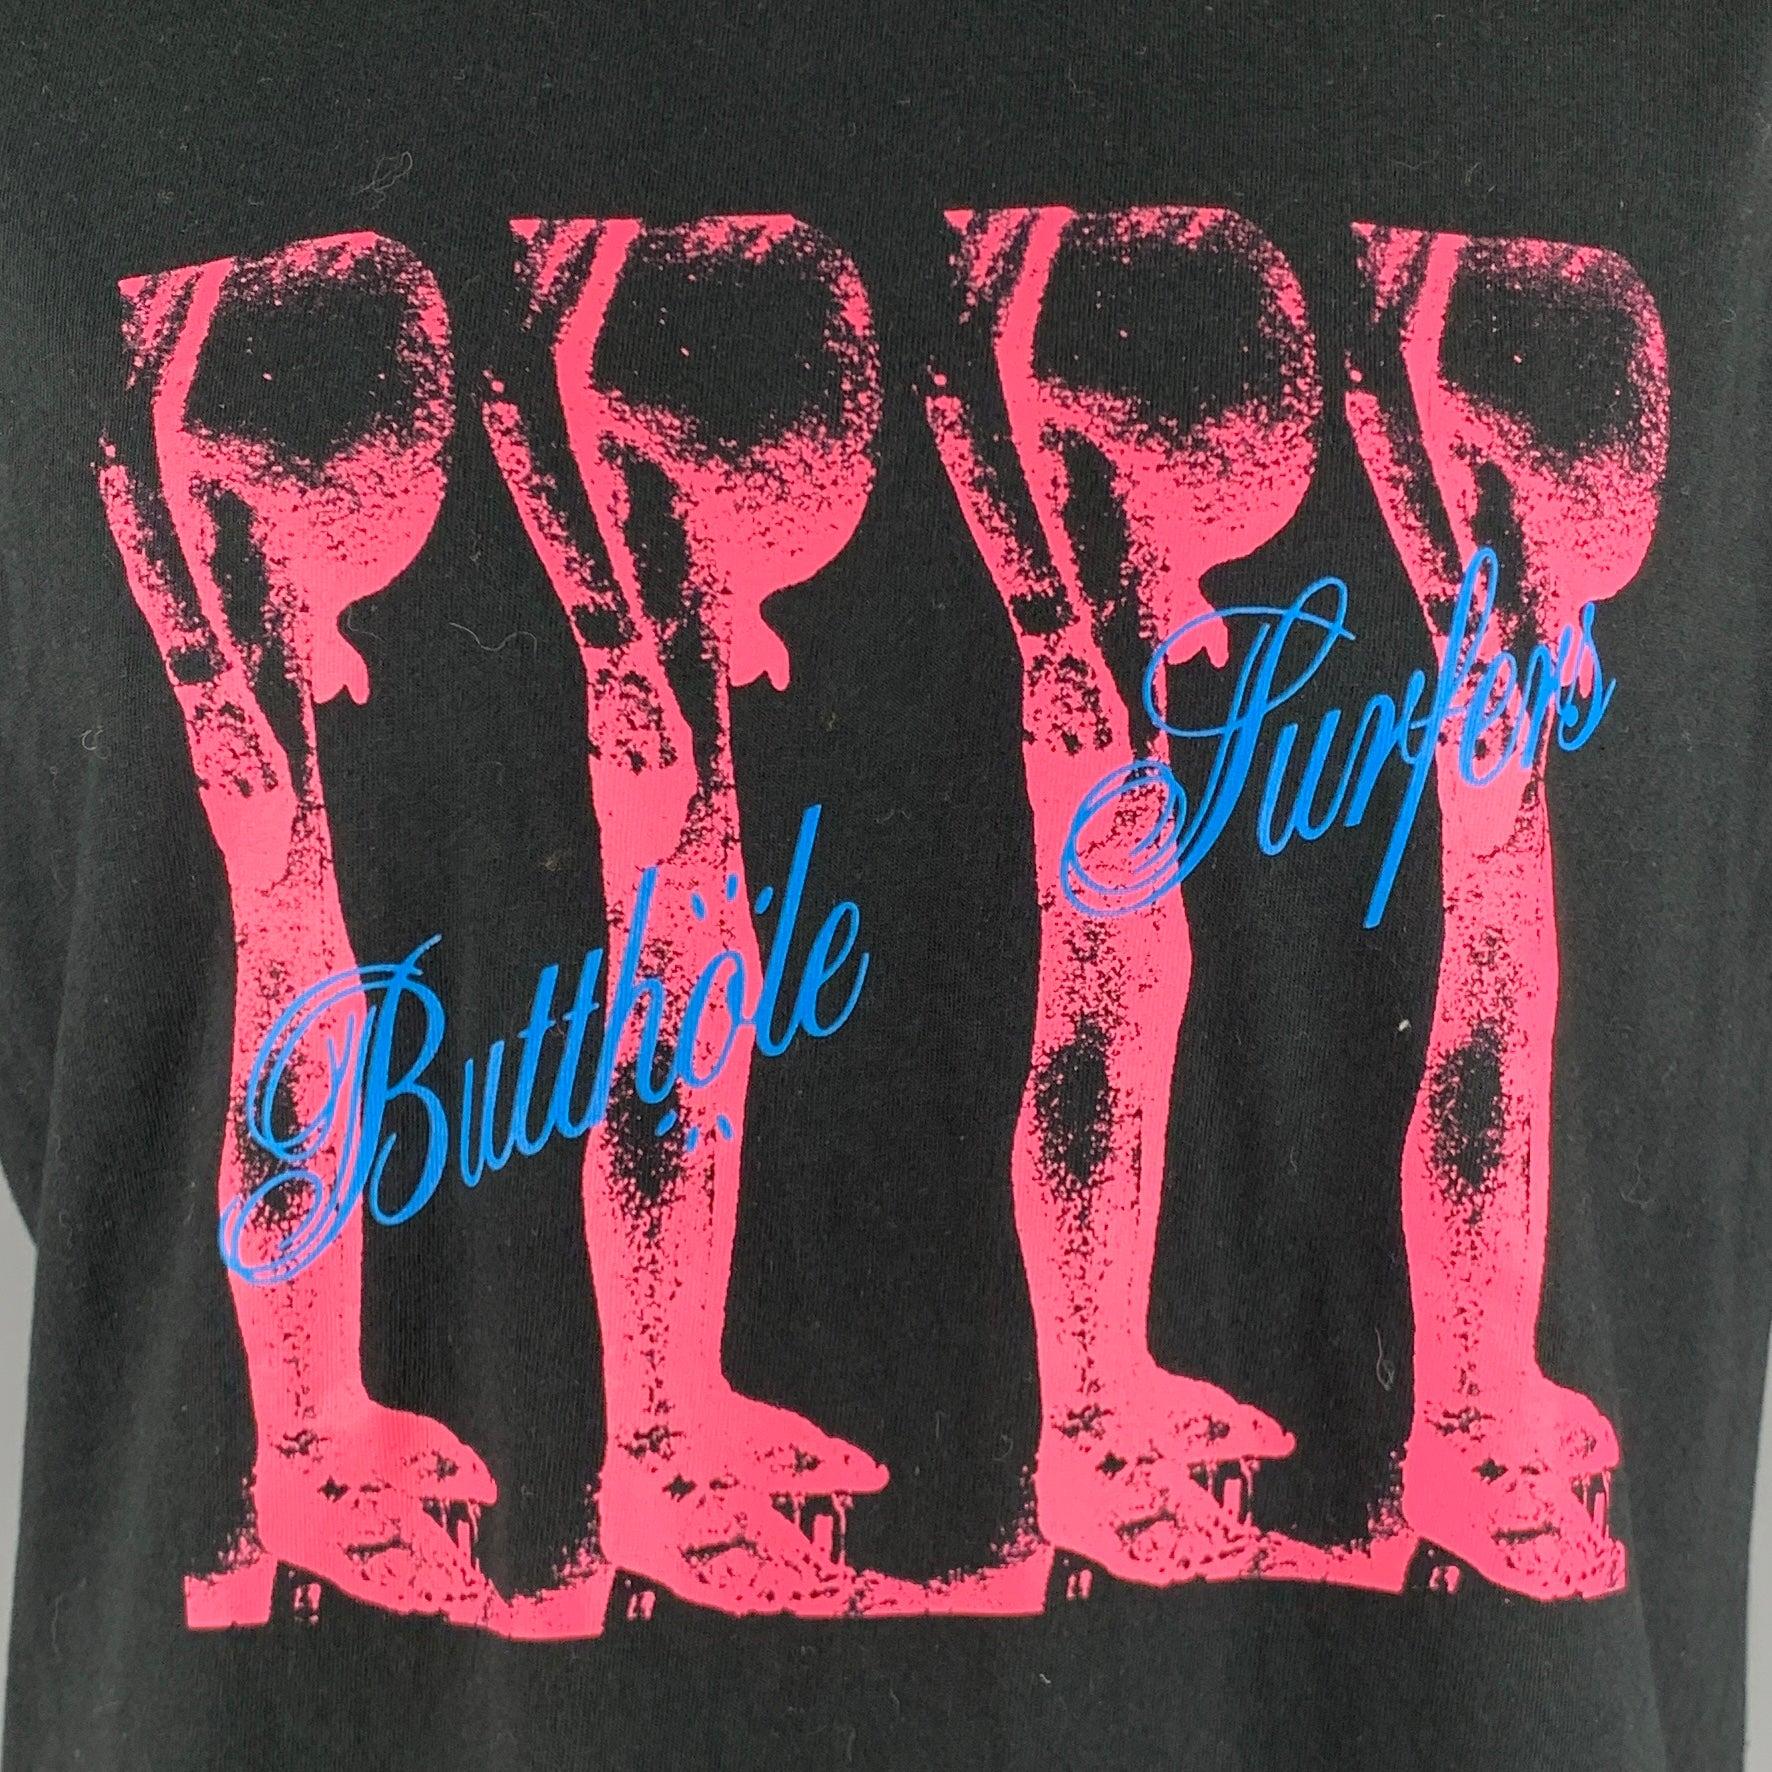 SUPREME x BUTTHOLE SURFERS SS21 t-shirt in a black cotton fabric featuring pink and blue graphic print on front and back, and crew neck. Made in USA.New with Tags. 

Marked:   L 

Measurements: 
 
Shoulder: 21 inches Chest: 46 inches Sleeve: 9